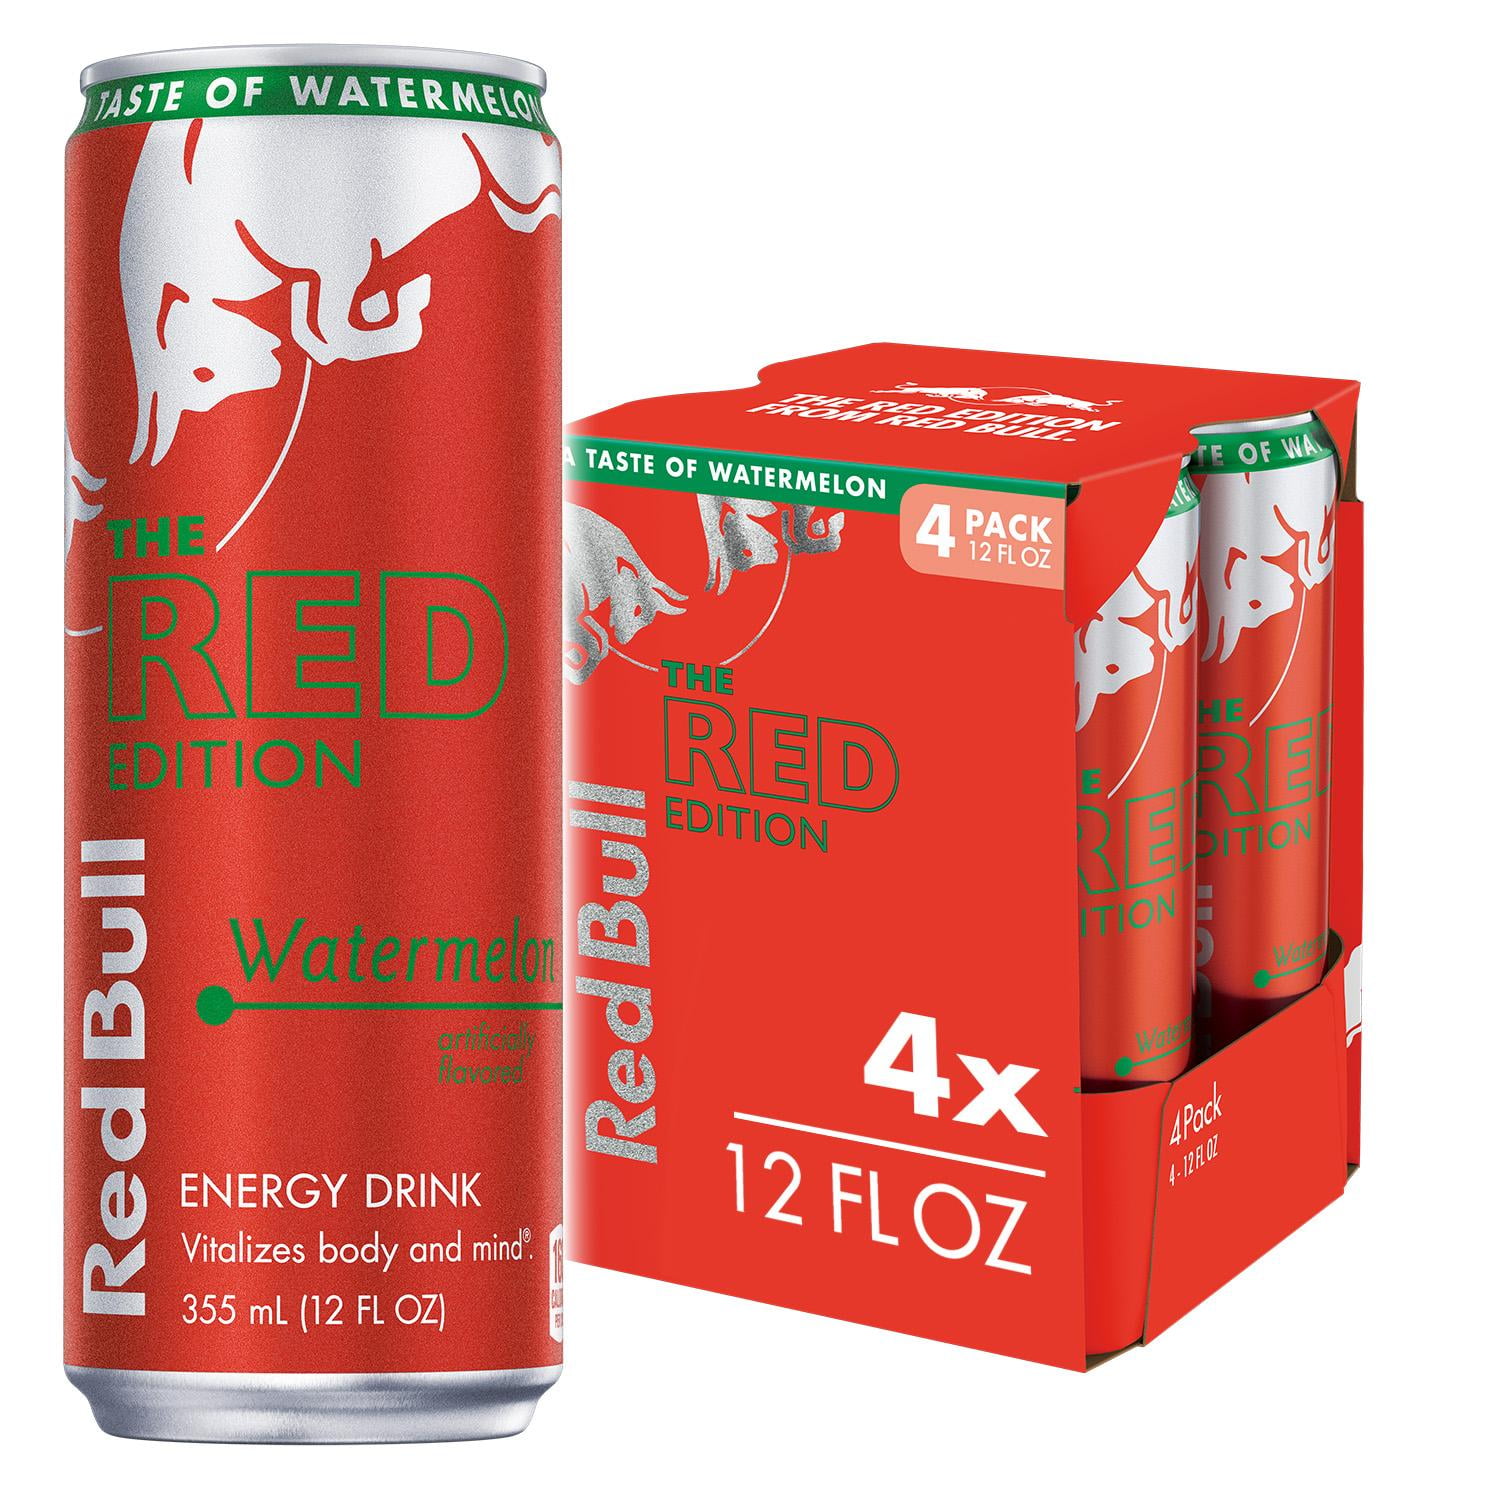 Red Bull Energy Drink, Watermelon, Red Edition, 12 fl oz (4 Pack